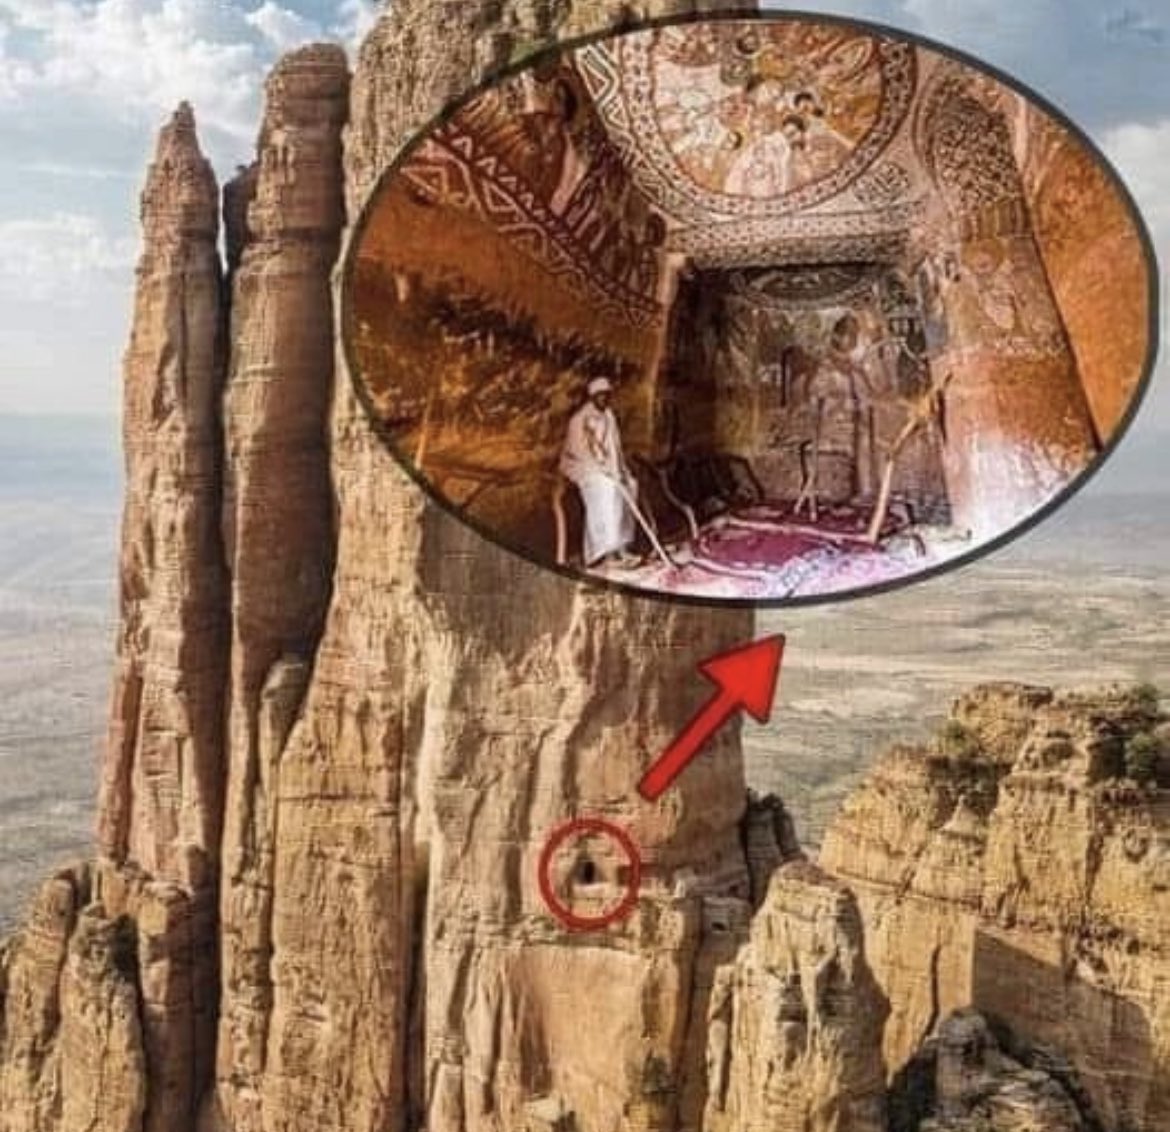 Ethiopia's 'Abuna Yemata Guh' is arguably the most inaccessible place of worship on earth and has to be climbed on foot to reach. Located in the Tigray region of northern Ethiopia, this ancient rock-hewn church stands atop a vertical cliff, perched at an elevation of around 2,580…